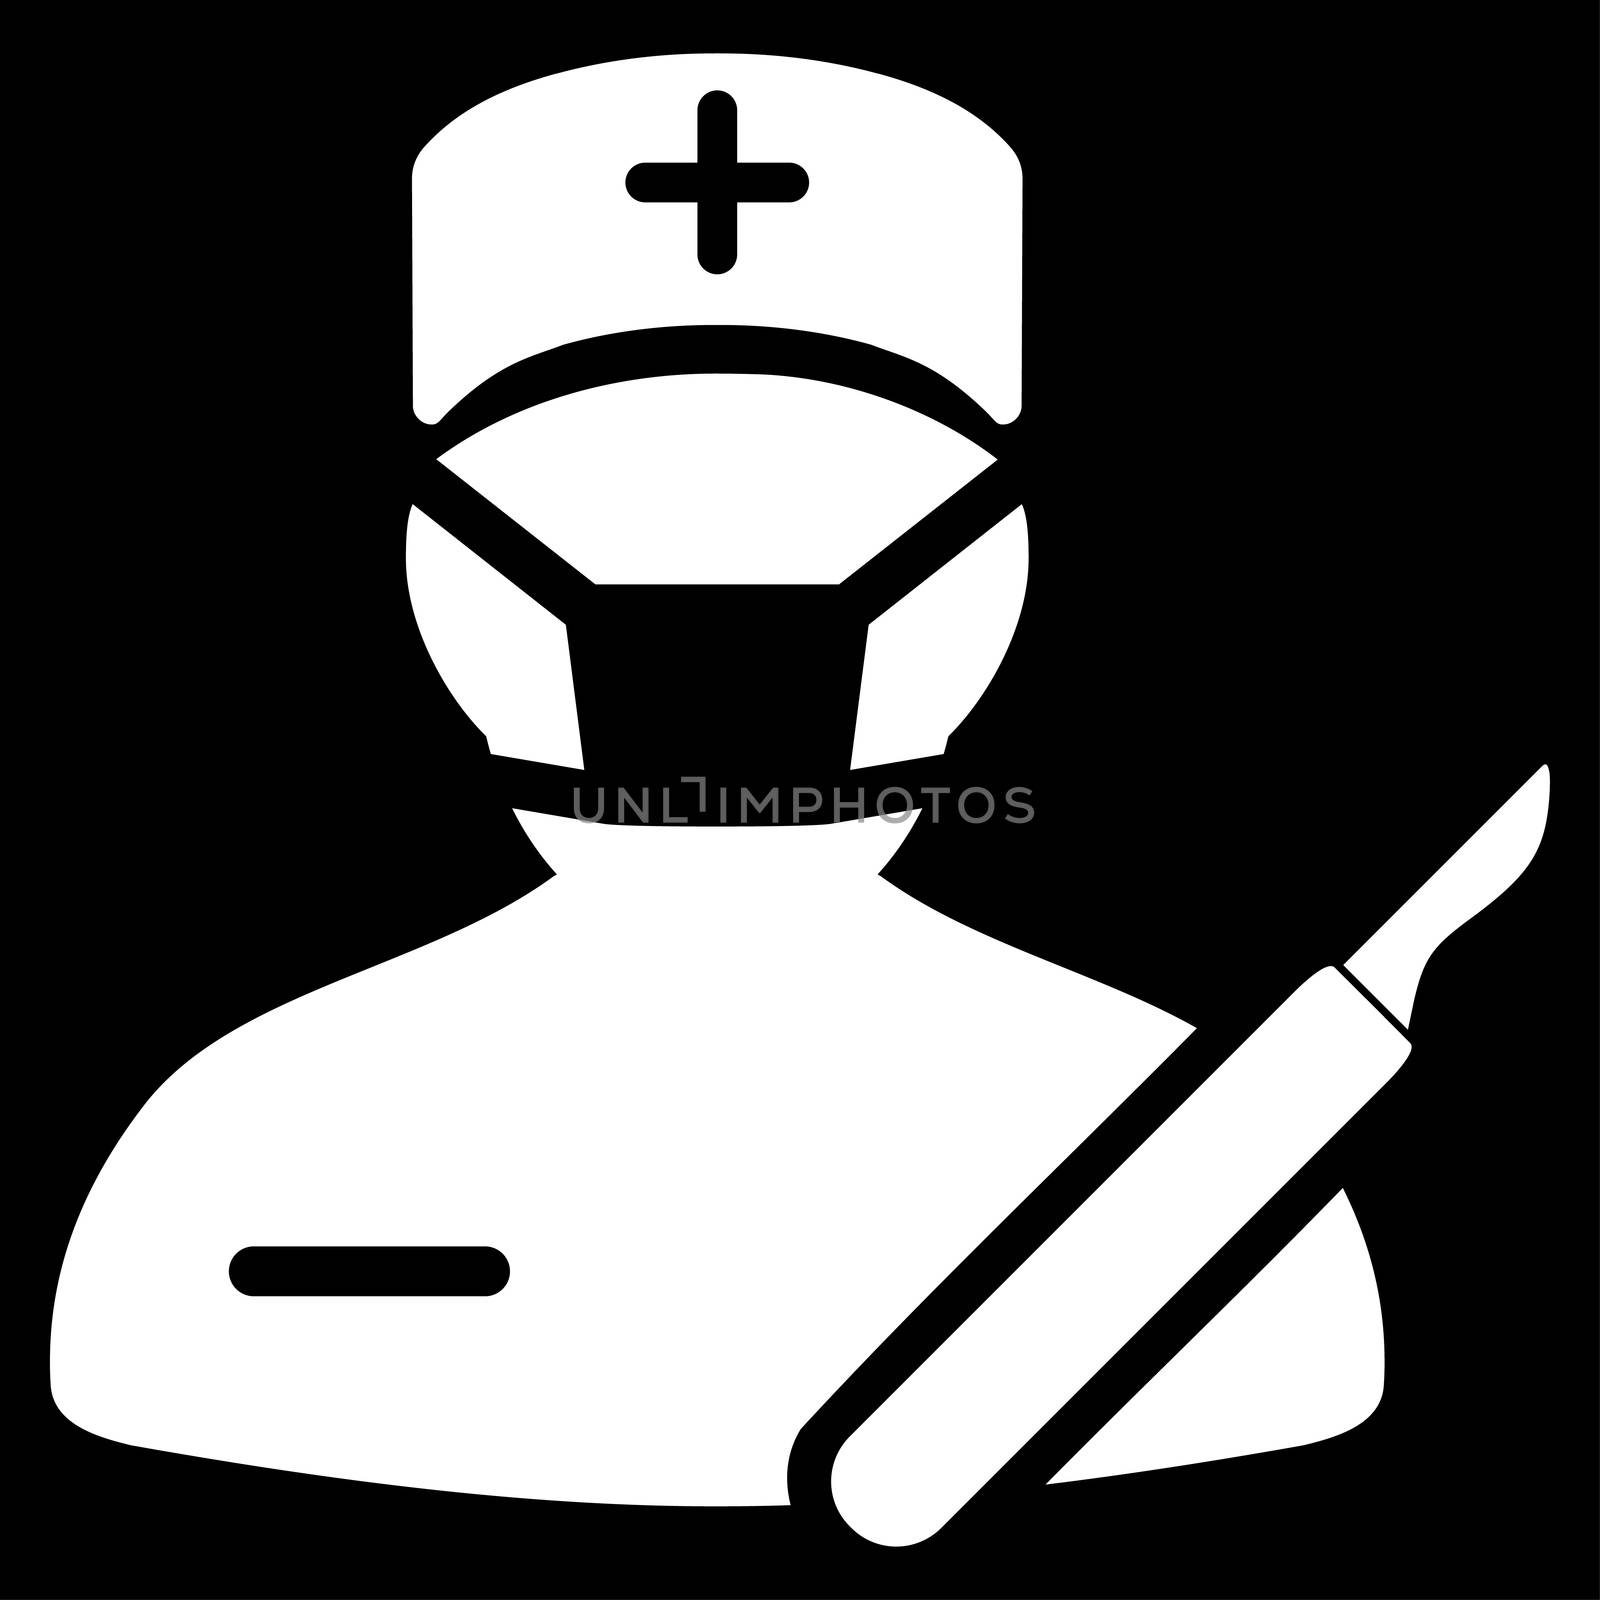 Surgeon raster icon. Style is flat symbol, white color, rounded angles, black background.